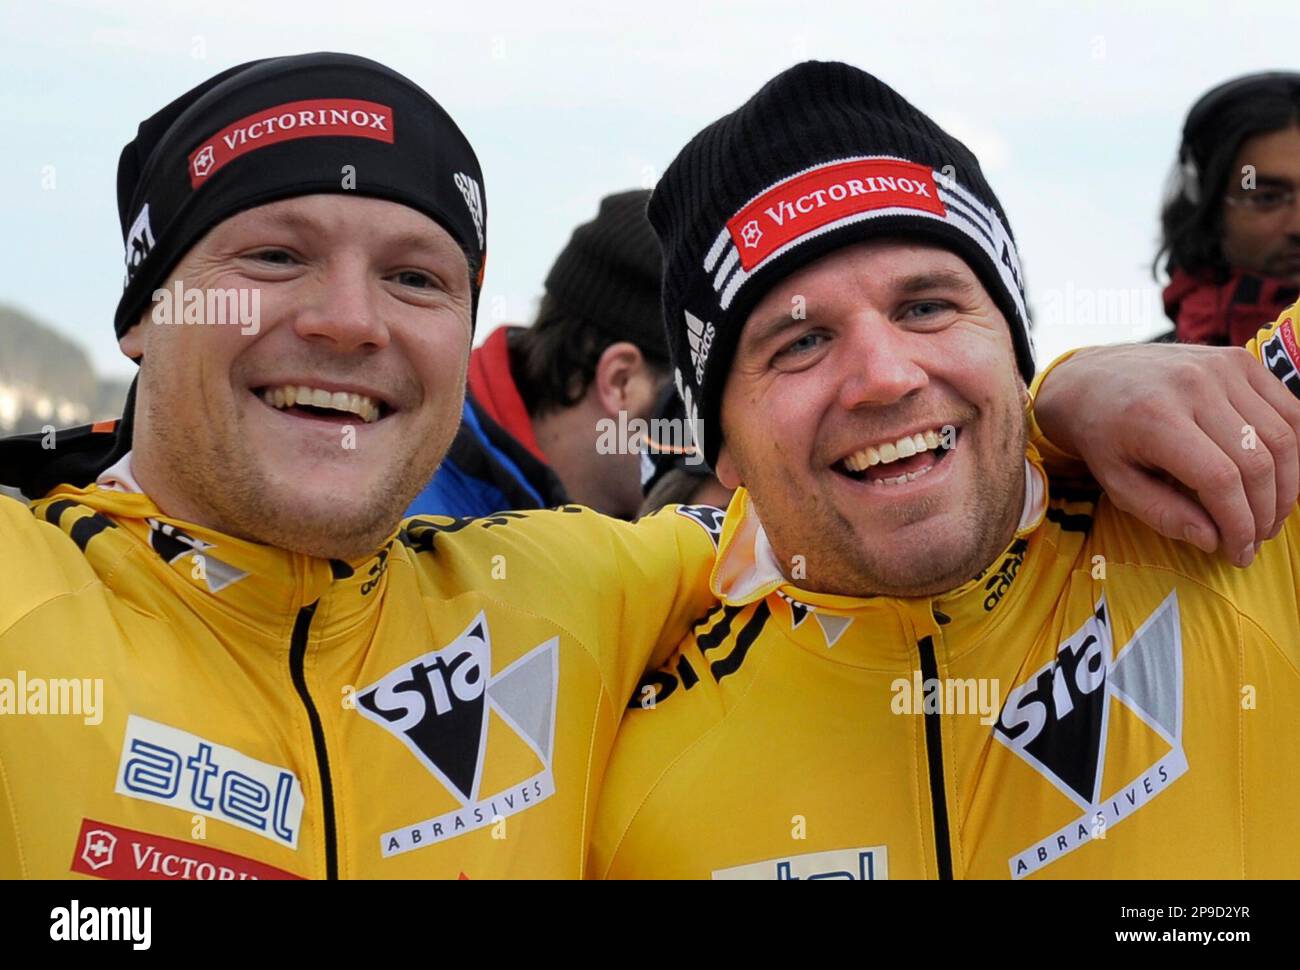 Switzerland's Beat Hefti, right, and his brakeman Thomas Lamparter, left,  celebrate after they finished the second run in men's two-man bobsleigh  FIBT World Cup opens in Winterberg, Germany, on Saturday, Nov. 29,